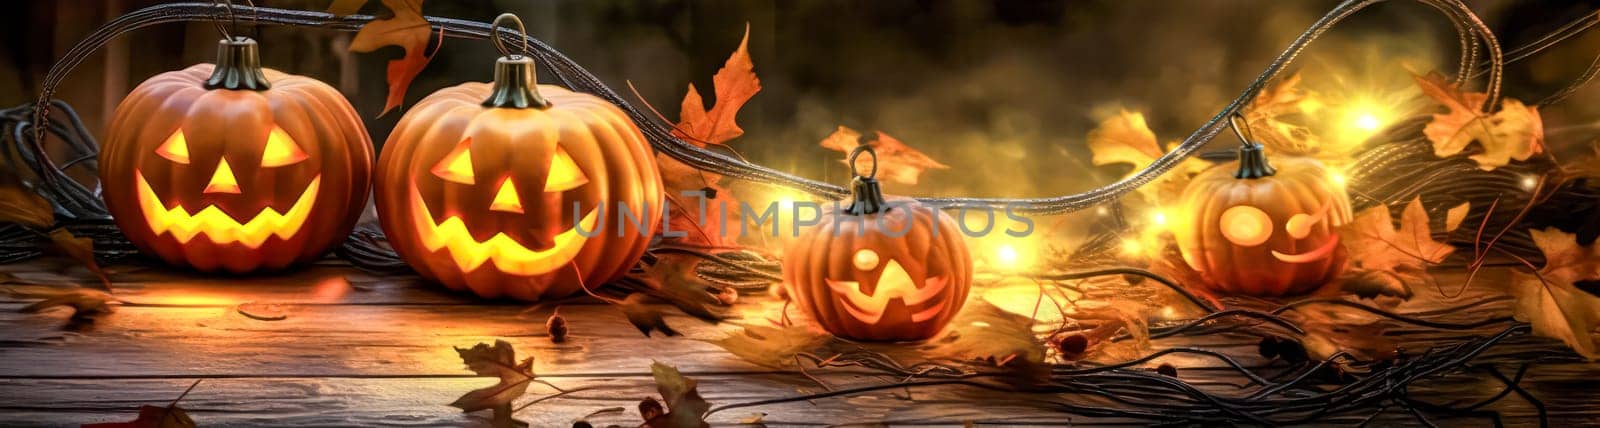 A painting of pumpkins with a spooky Halloween theme. by Alla_Morozova93